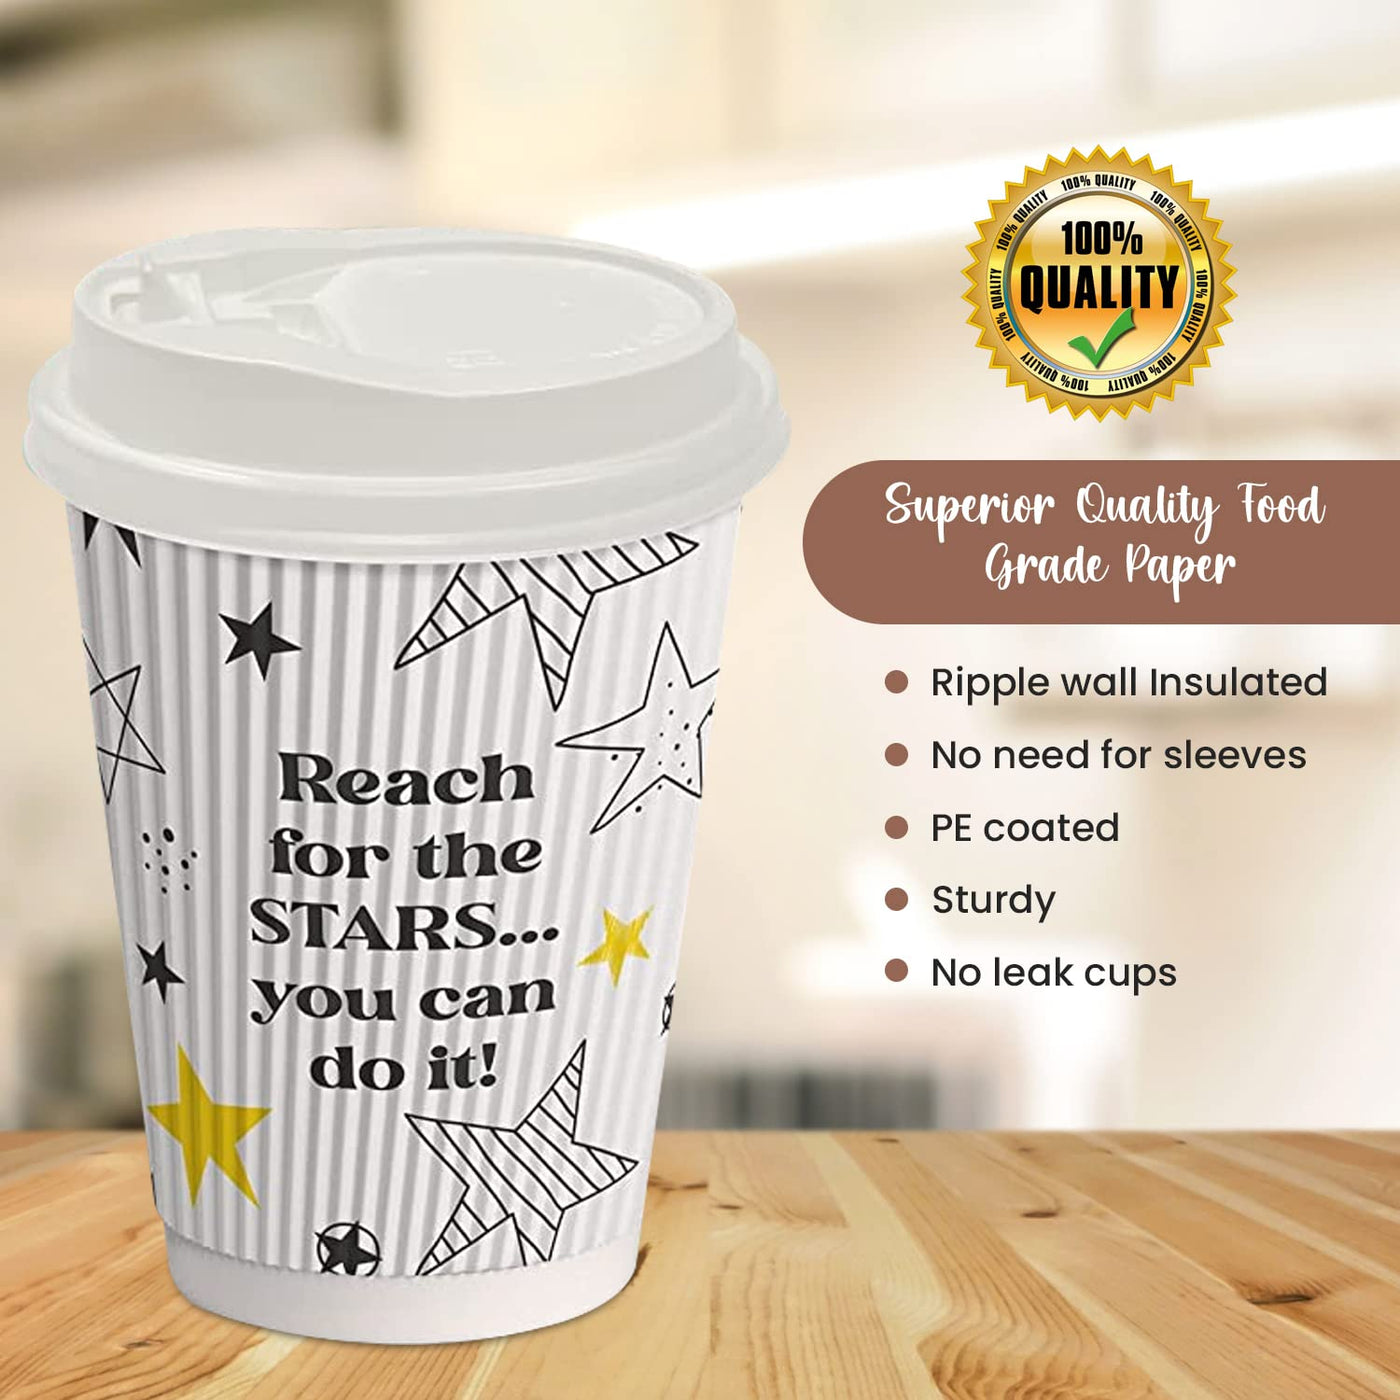 Dessie 100 Disposable Coffee Cups with Lids 12 Oz, To Go Coffee Paper Cups with Lids and Stirrers, Motivational Coffee Cups with Lids 12 Oz.